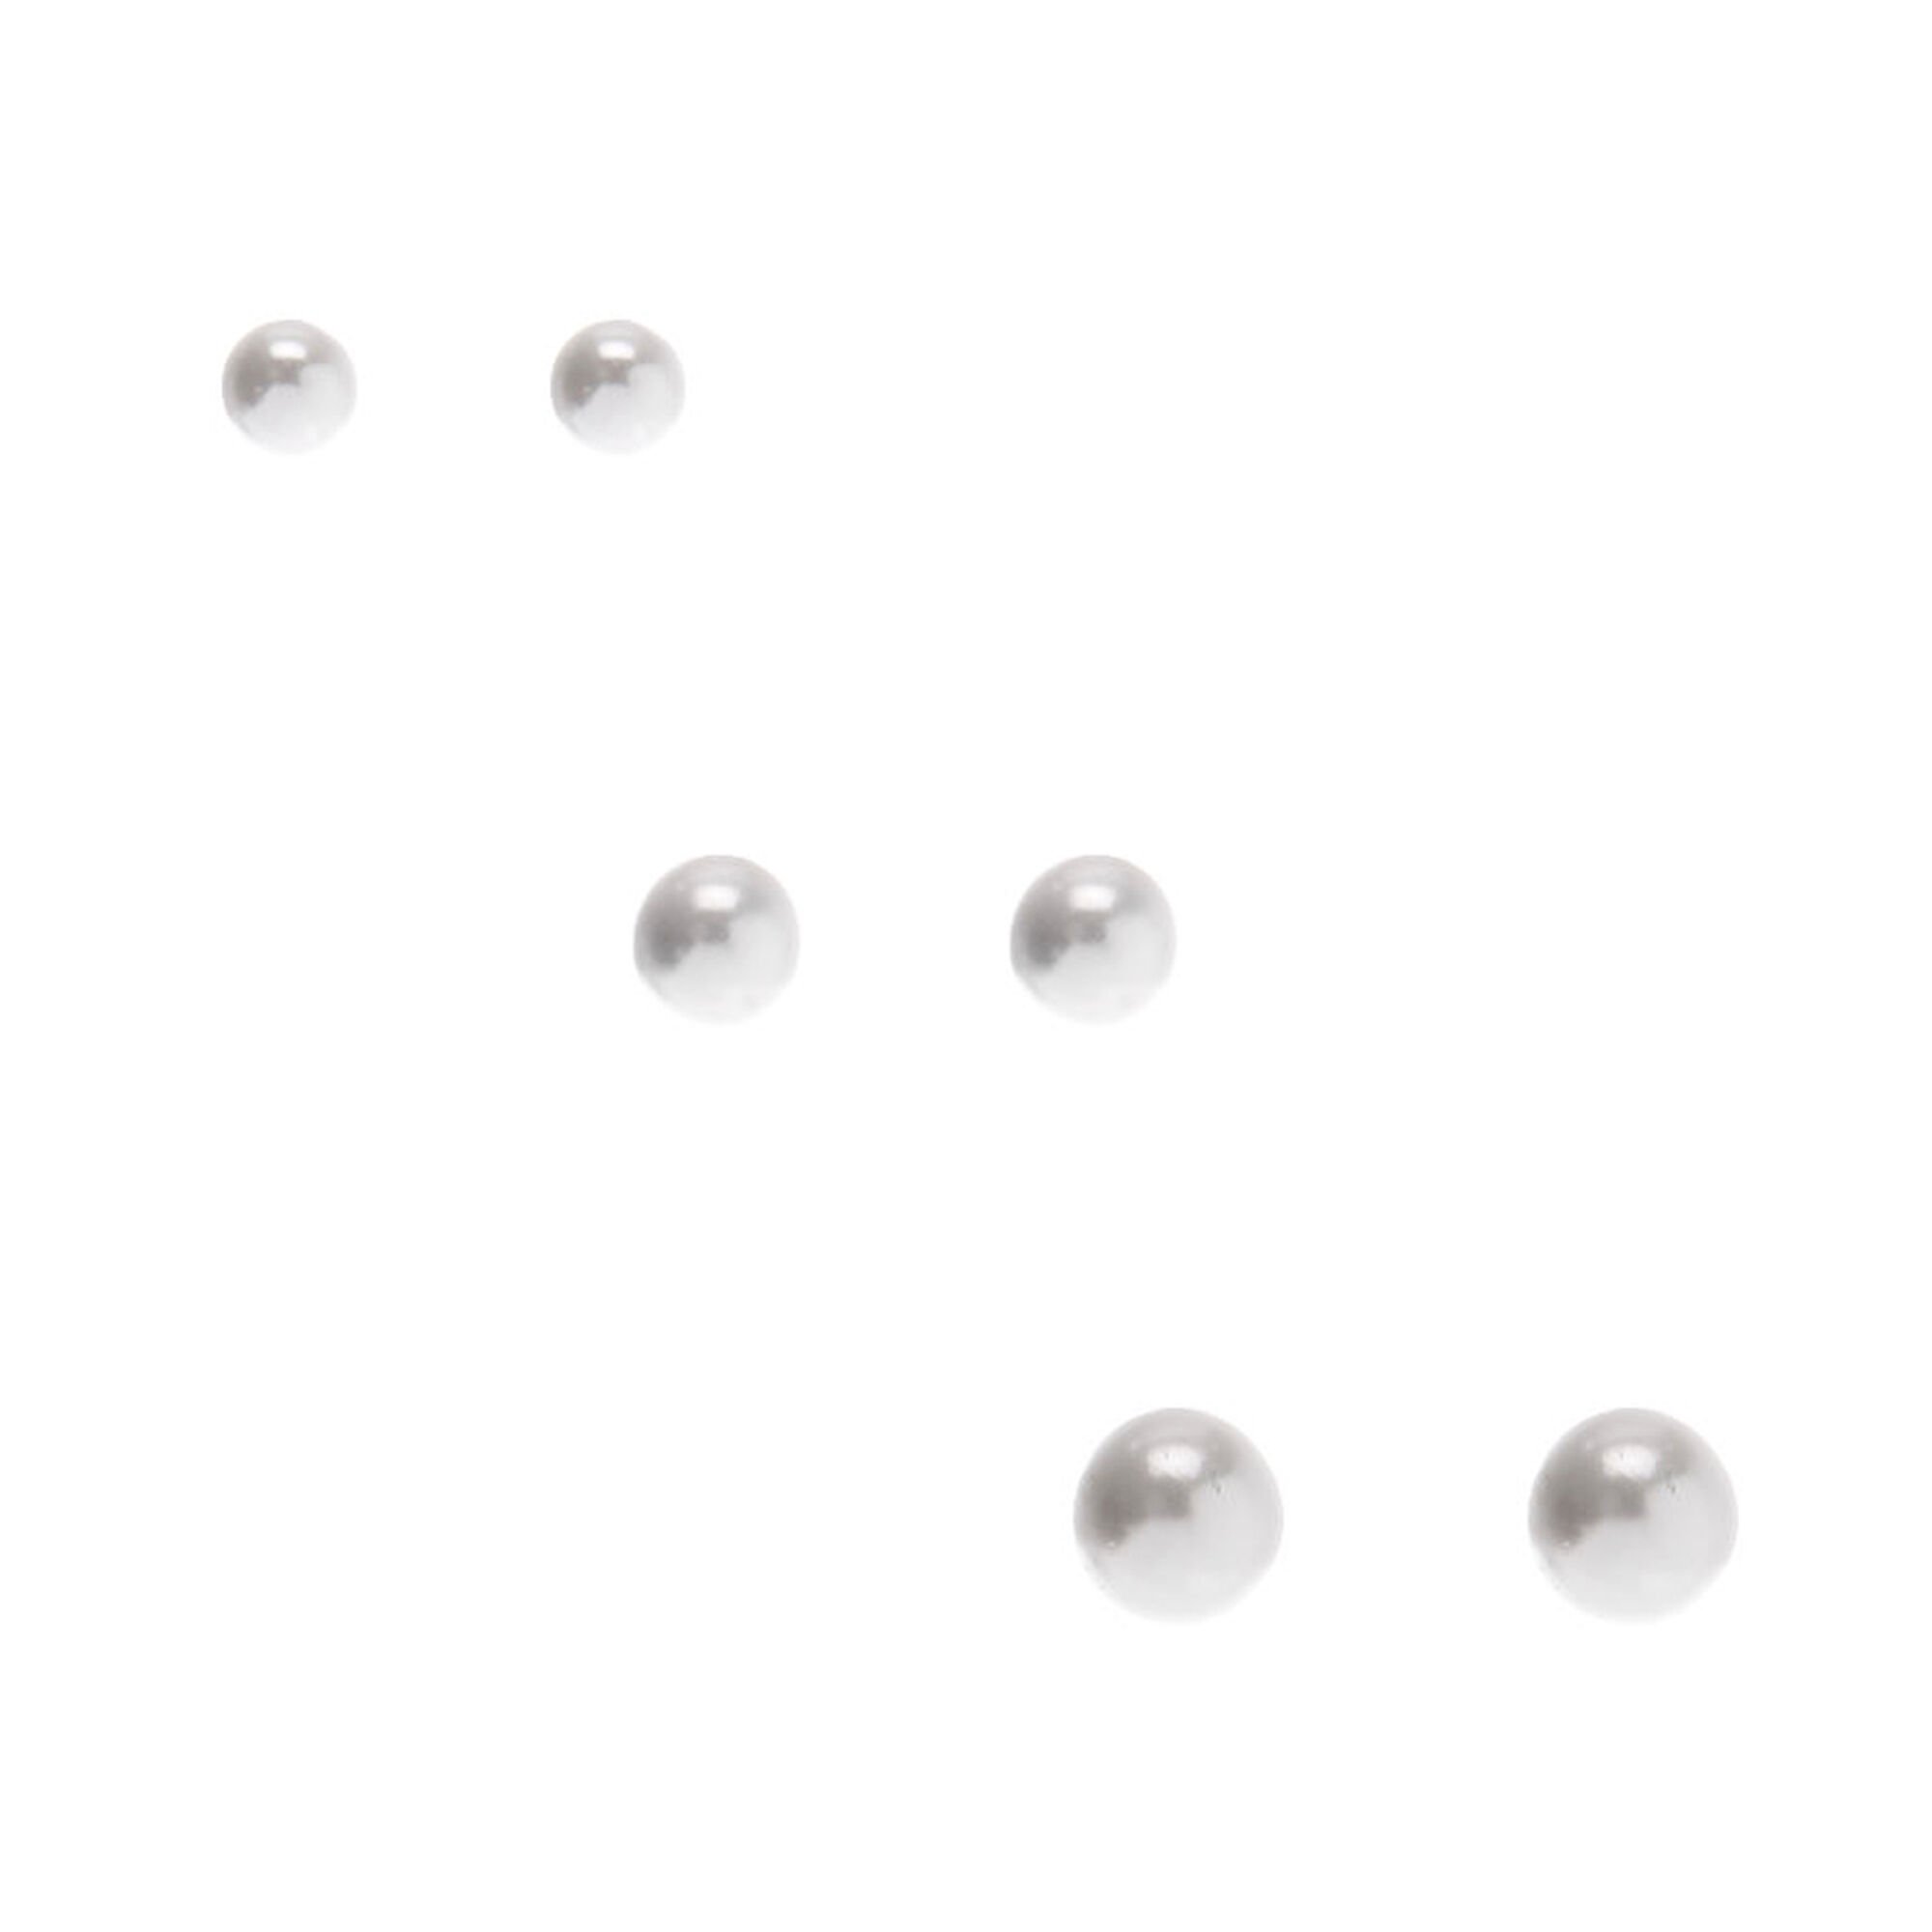 View Claires SliverTone Graduated Pearl Stud Earrings 3 Pack White information